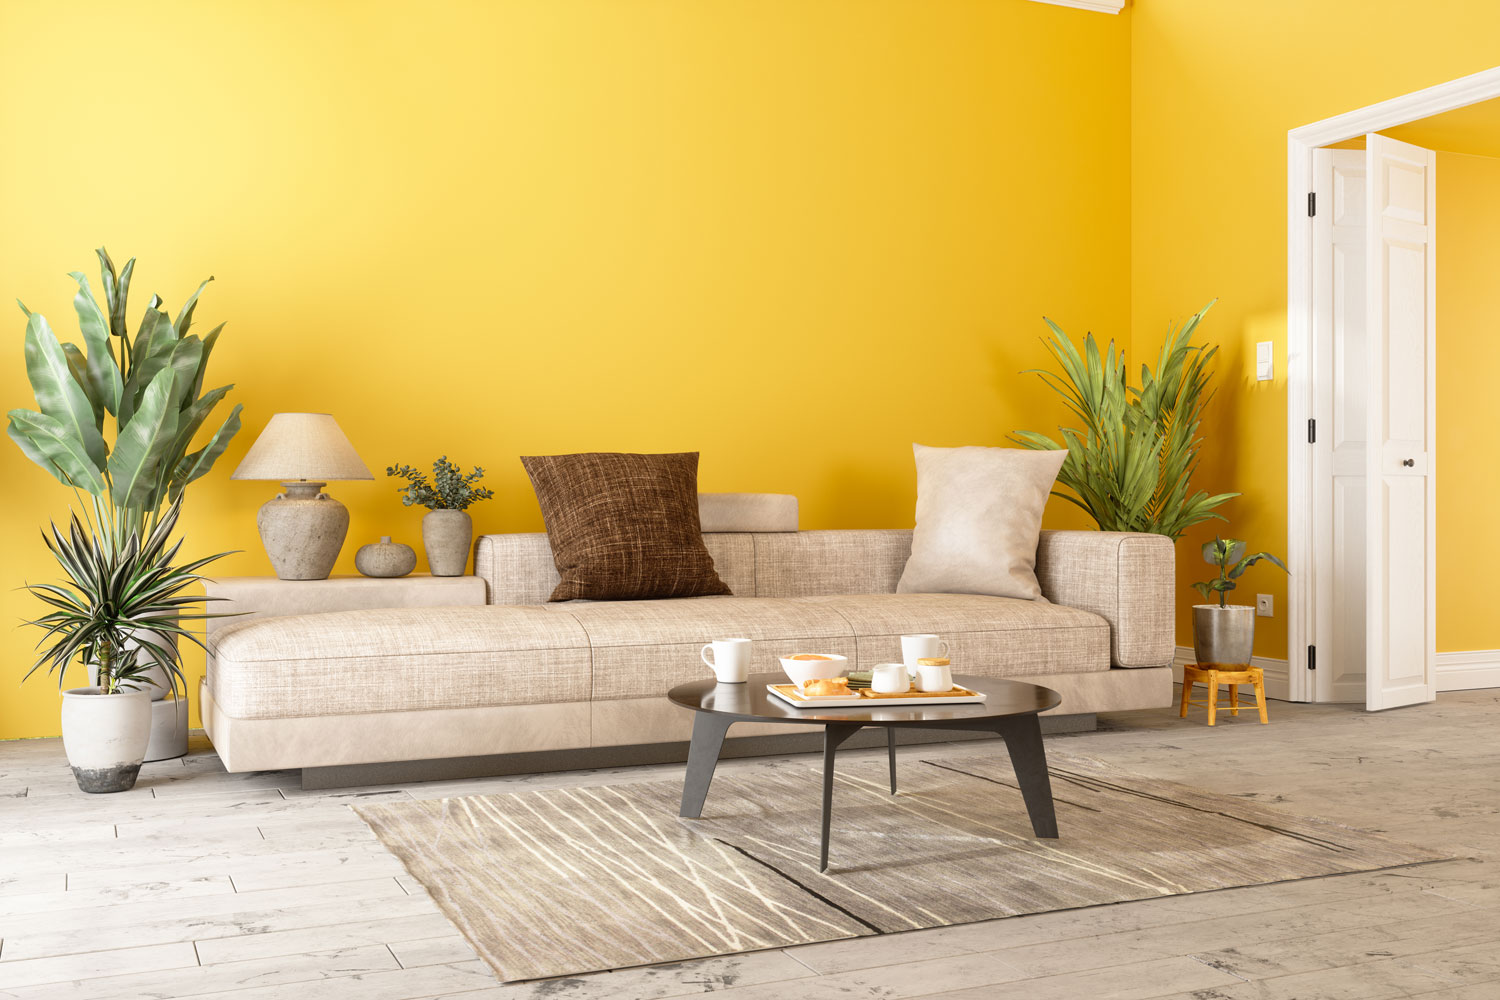 Yellow colored living room with a beige sofa with tan and brown throw pillows